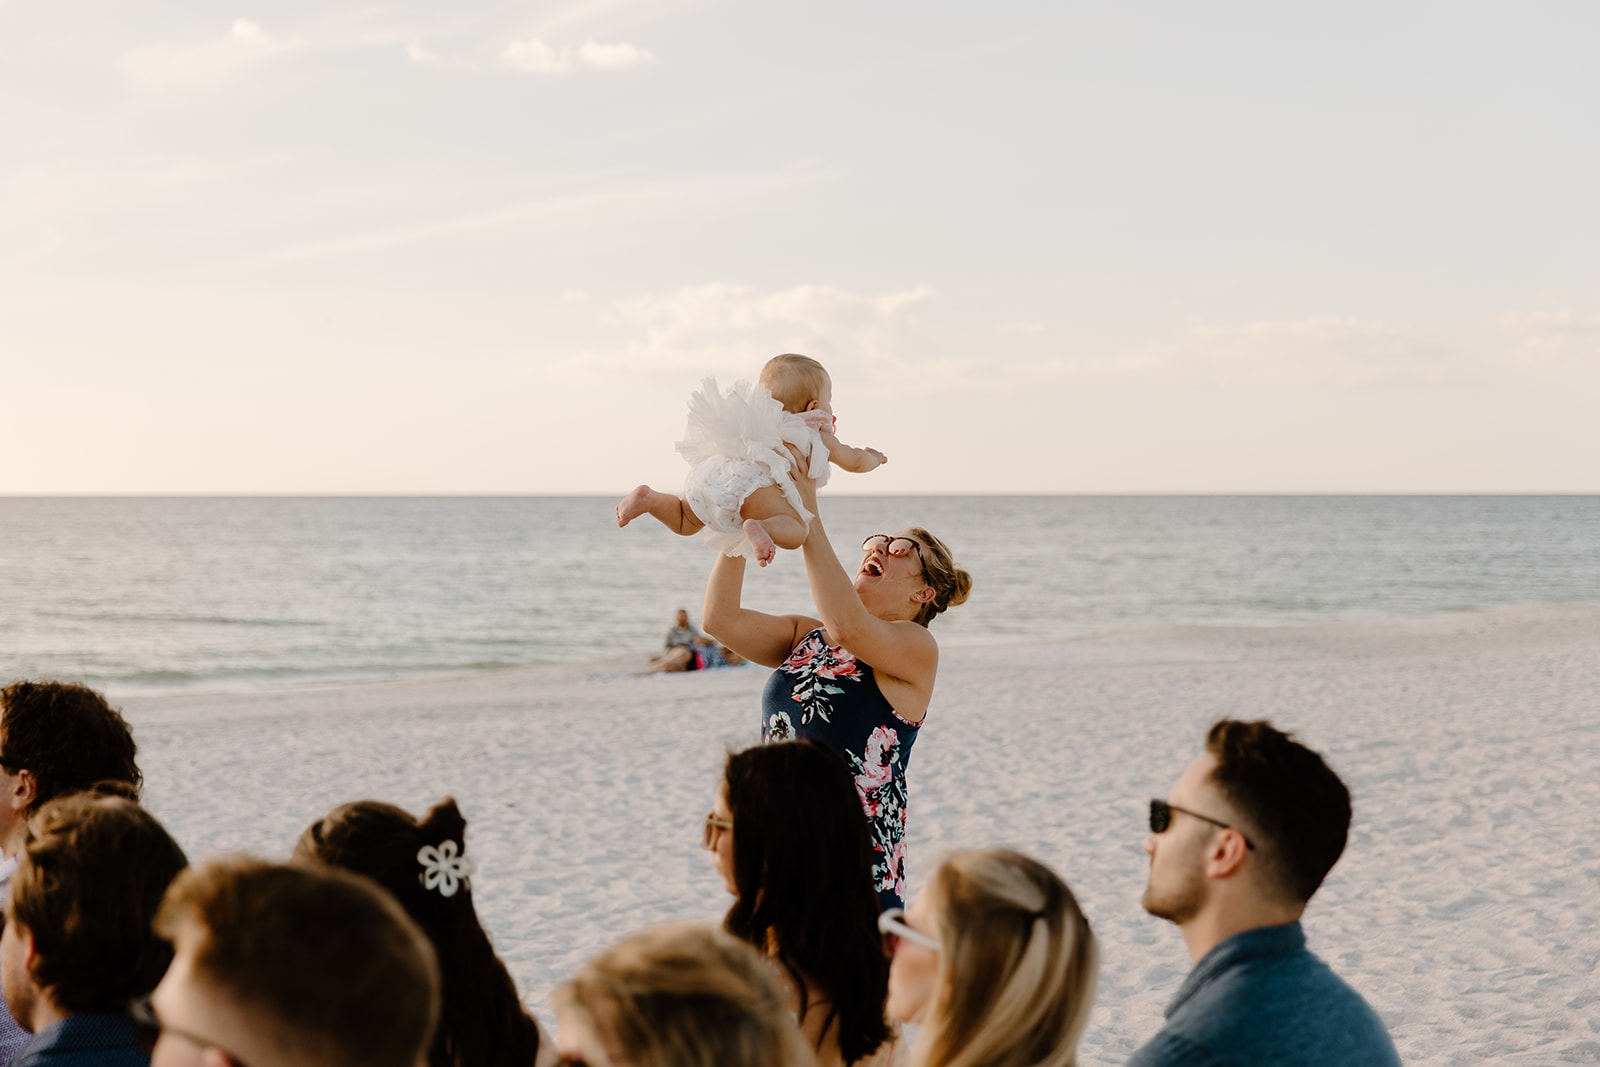 A woman tosses her daughter into the air with the ocean in the background